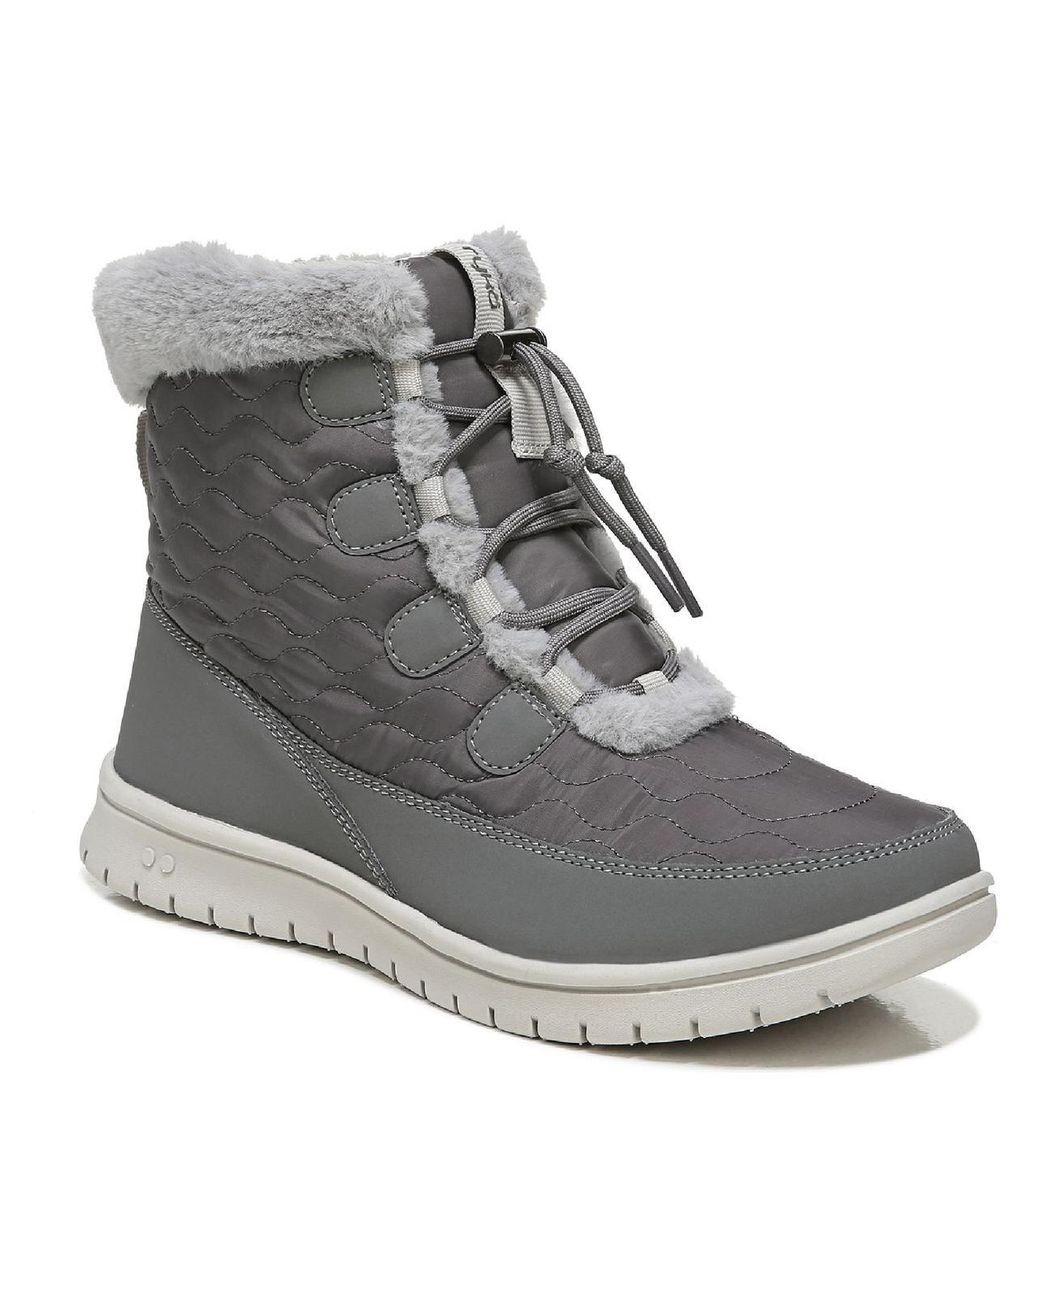 Ryka Snowbound Quilted Nylon Comfort Hiking Boots in Gray | Lyst